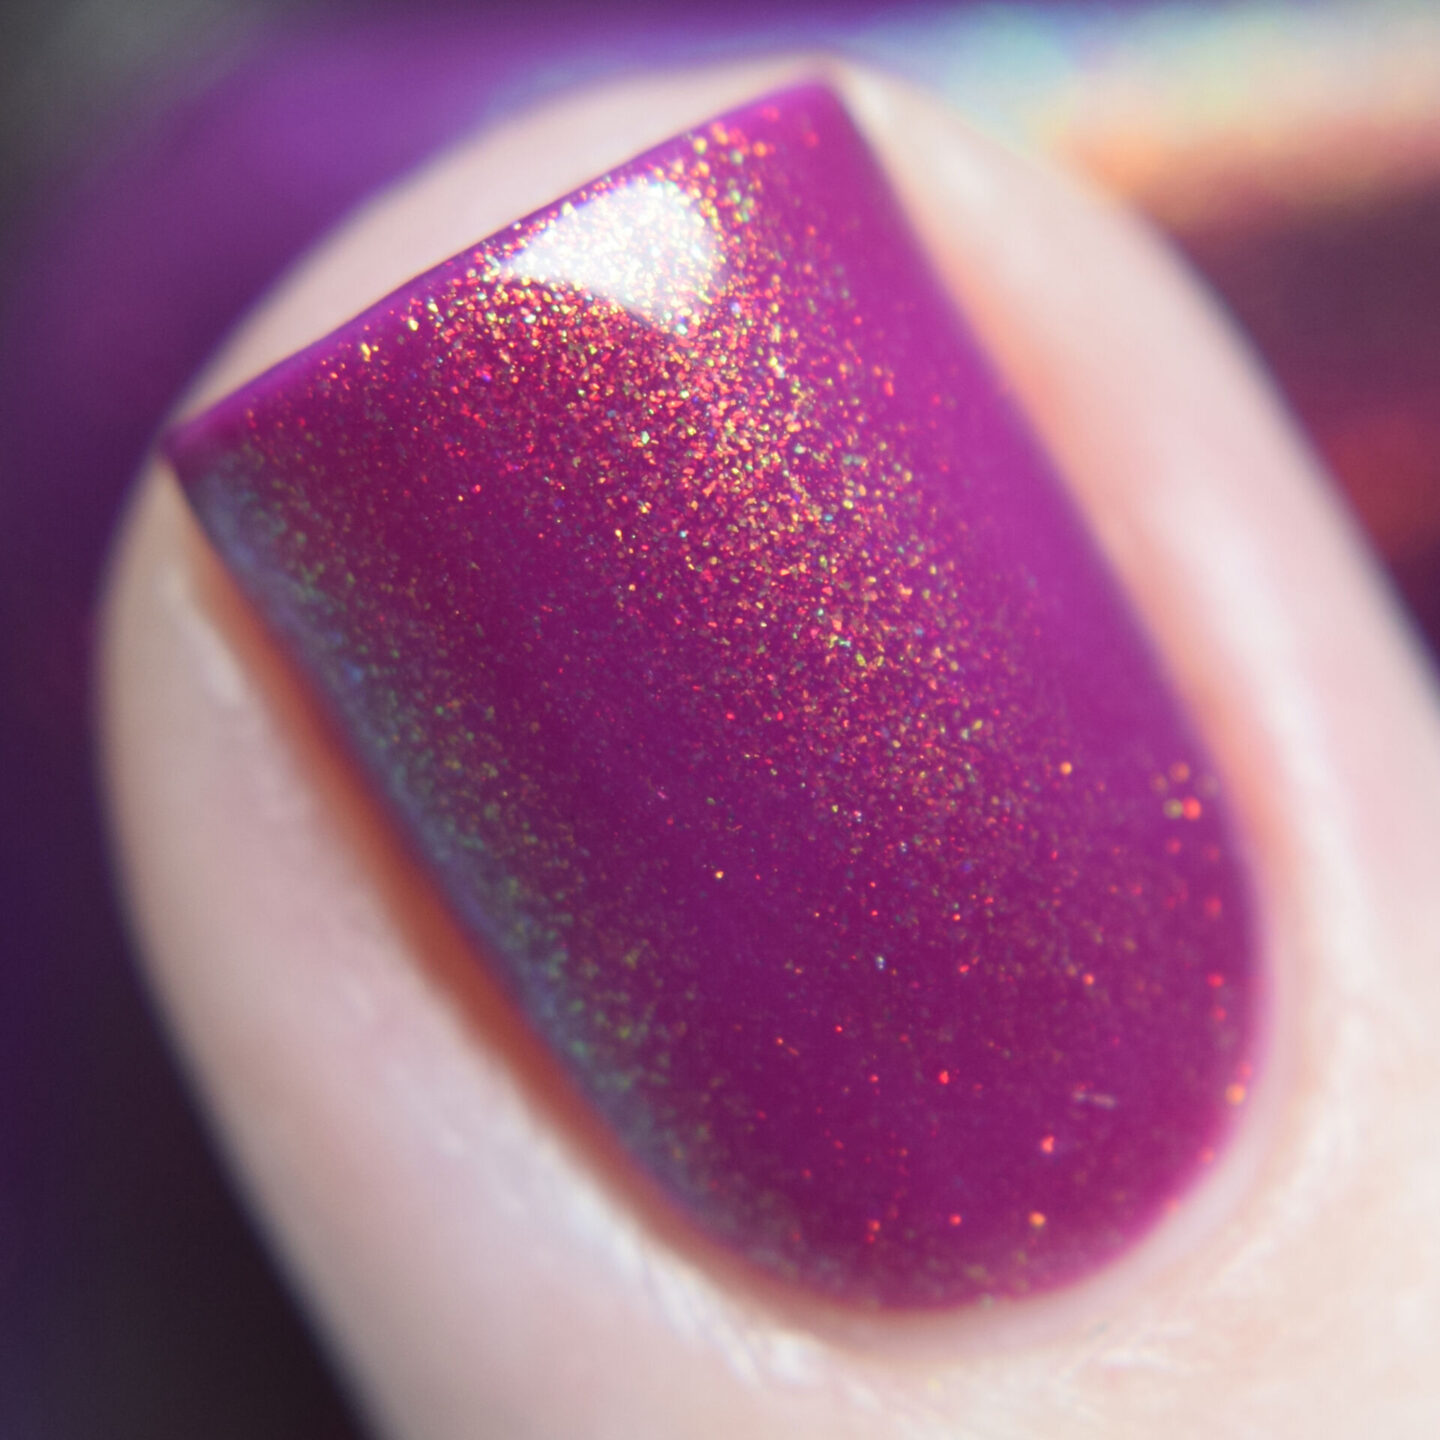 Lemming Lacquer She Was a Rainbow is a purple leaning magenta jelly packed with shimmer shifting gold to copper to green to blue. Nail polish swatch Polish Pickup PPU Exclusive